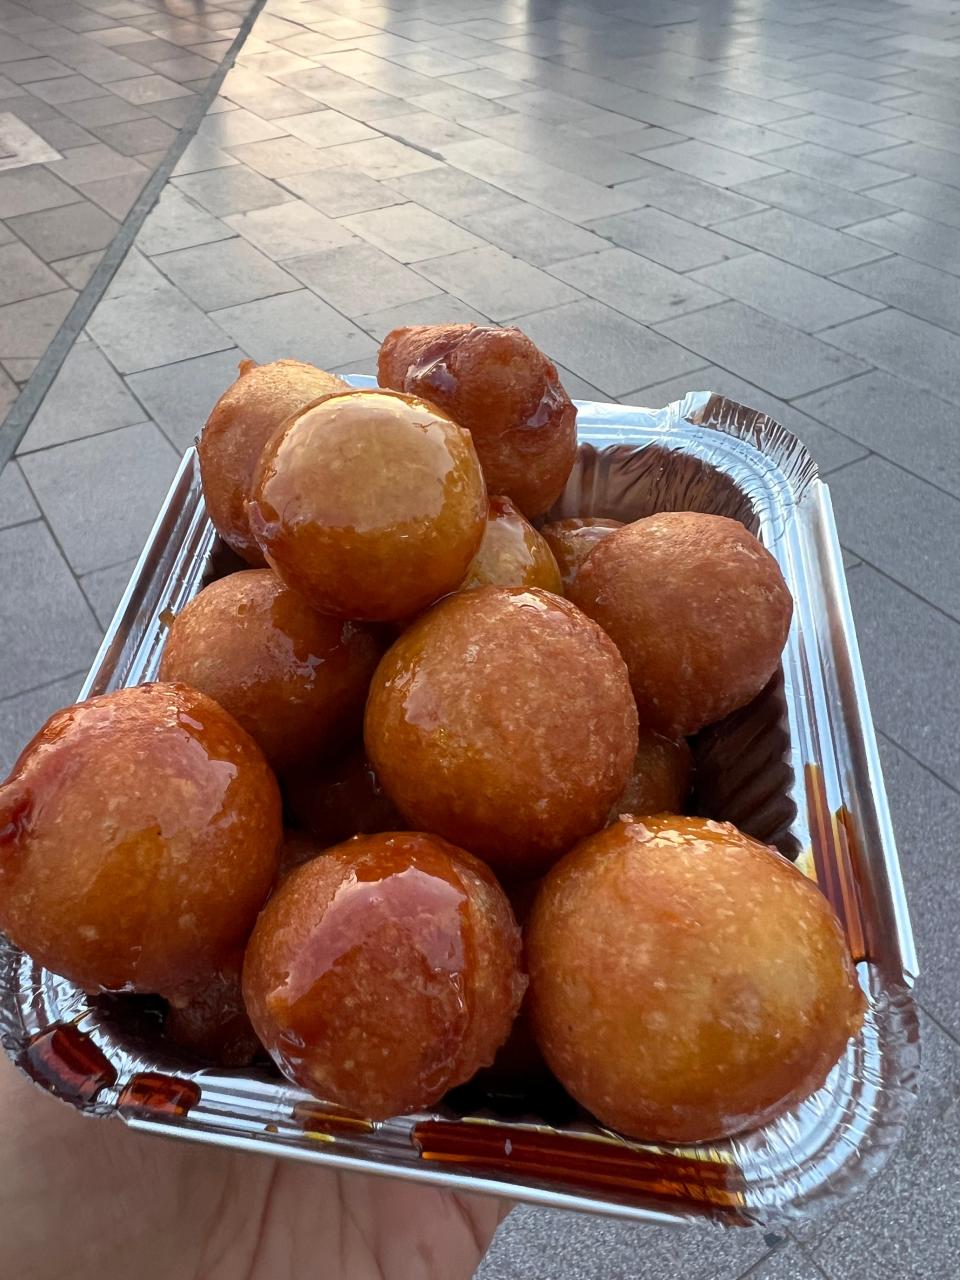 Luqaimat is a deep-fried dough covered with data syrup.